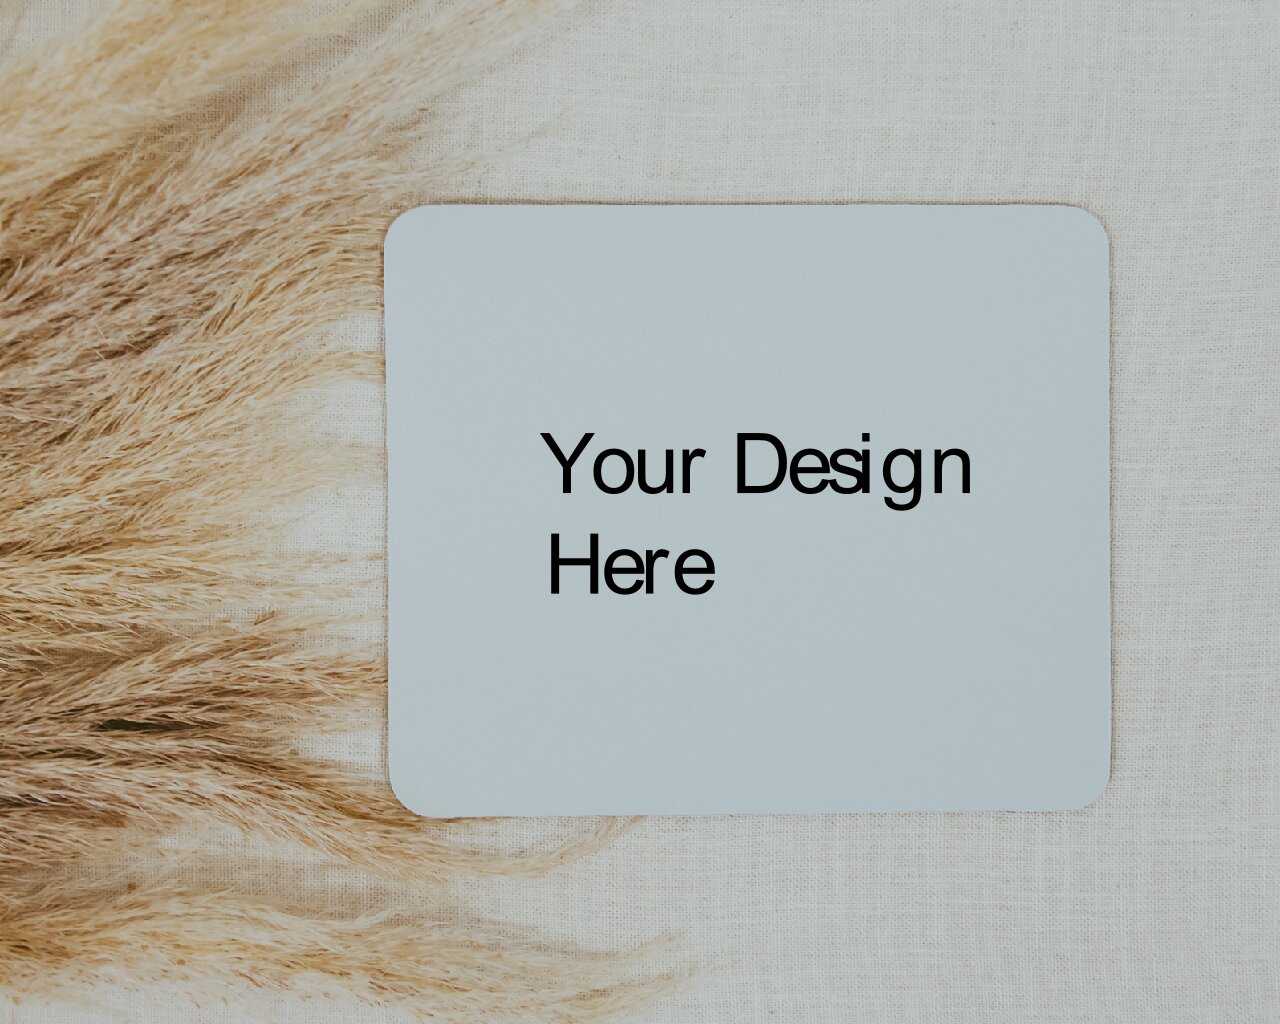 Personalized Mouse Mat